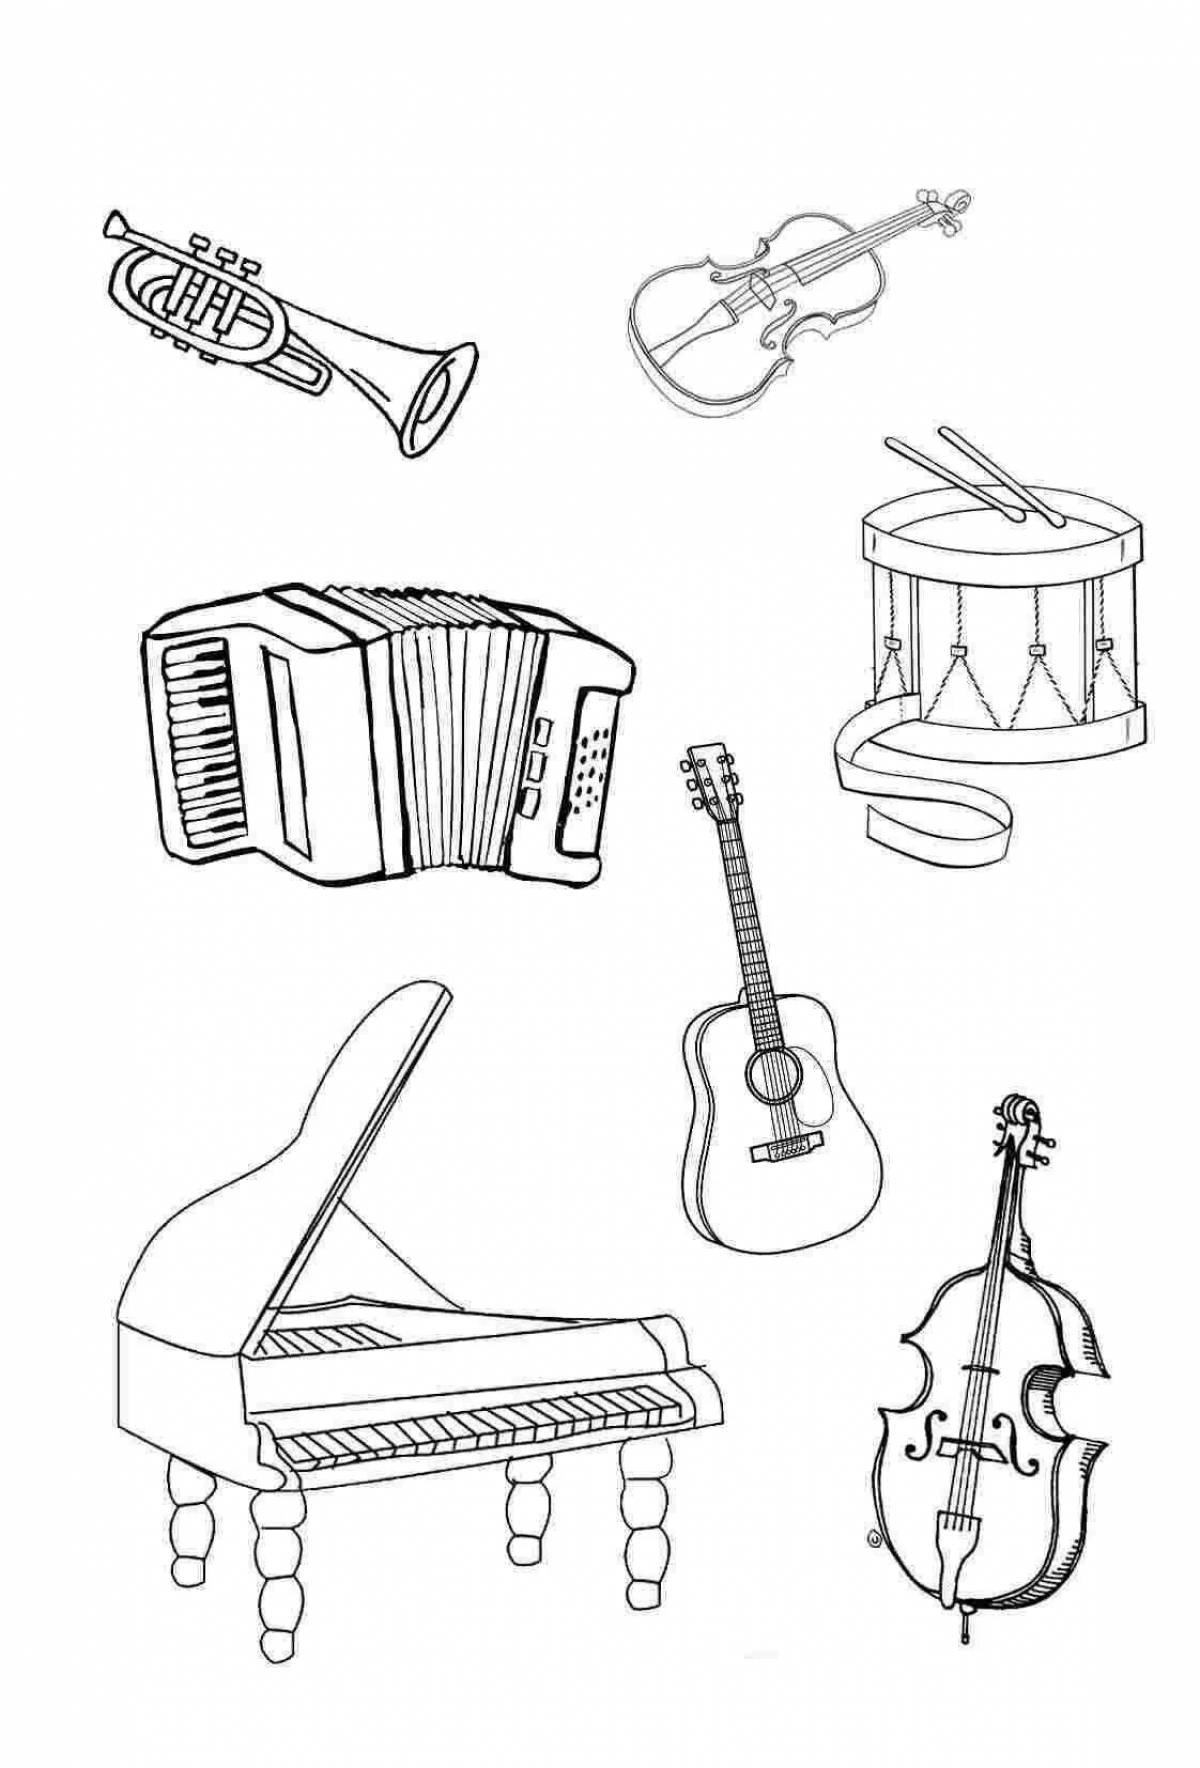 Fine musical instruments coloring book